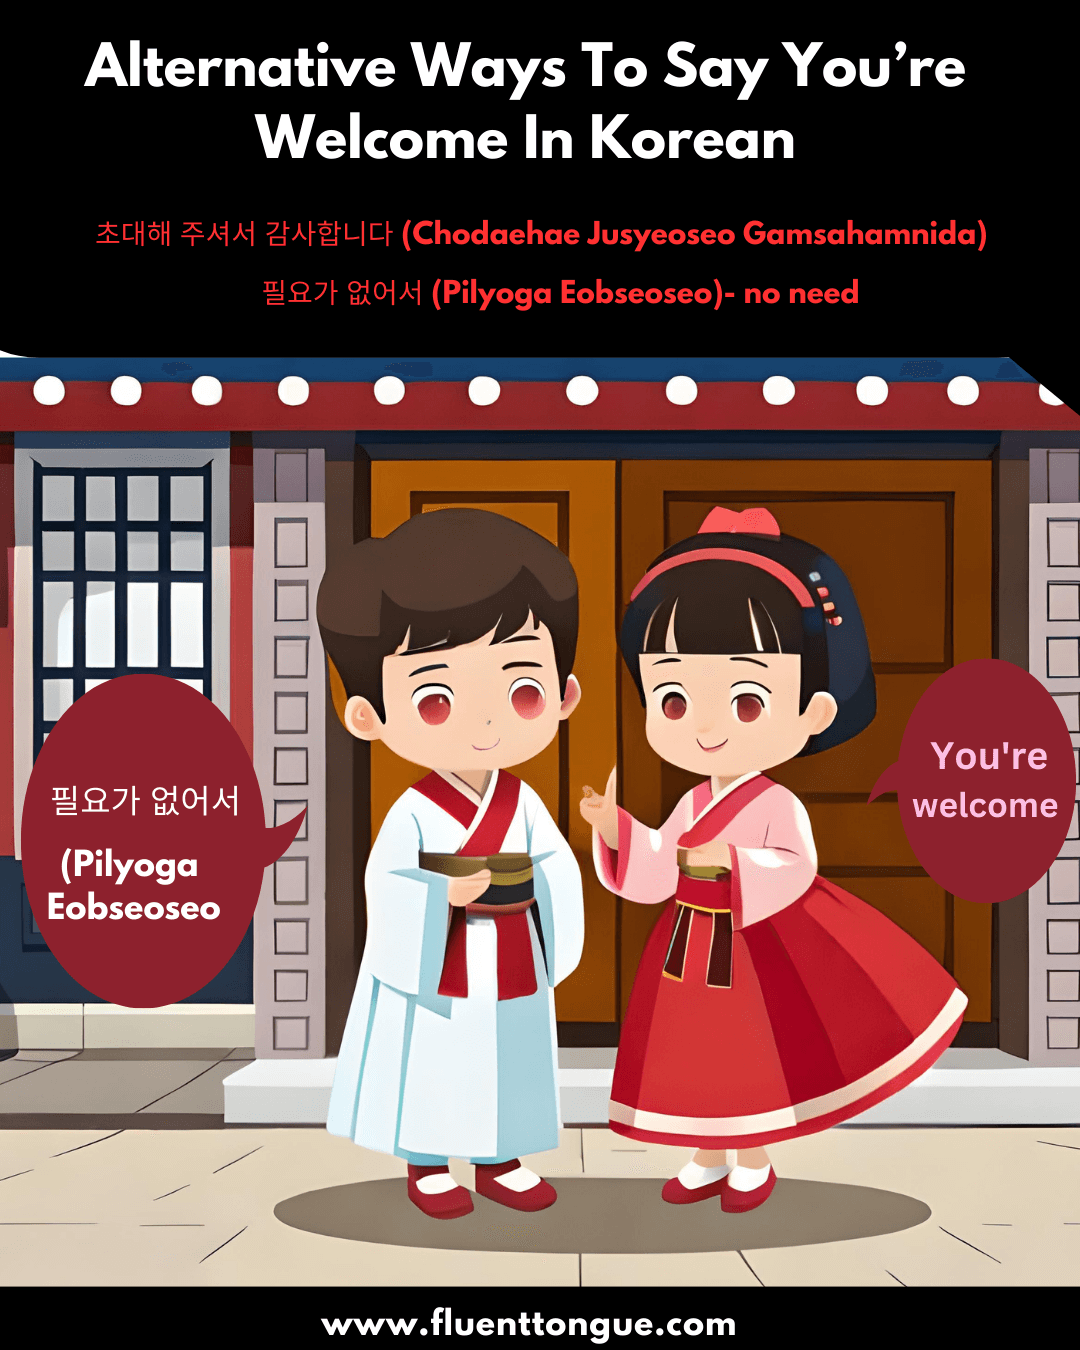 Alternative Ways to Say You're Welcome in Korean